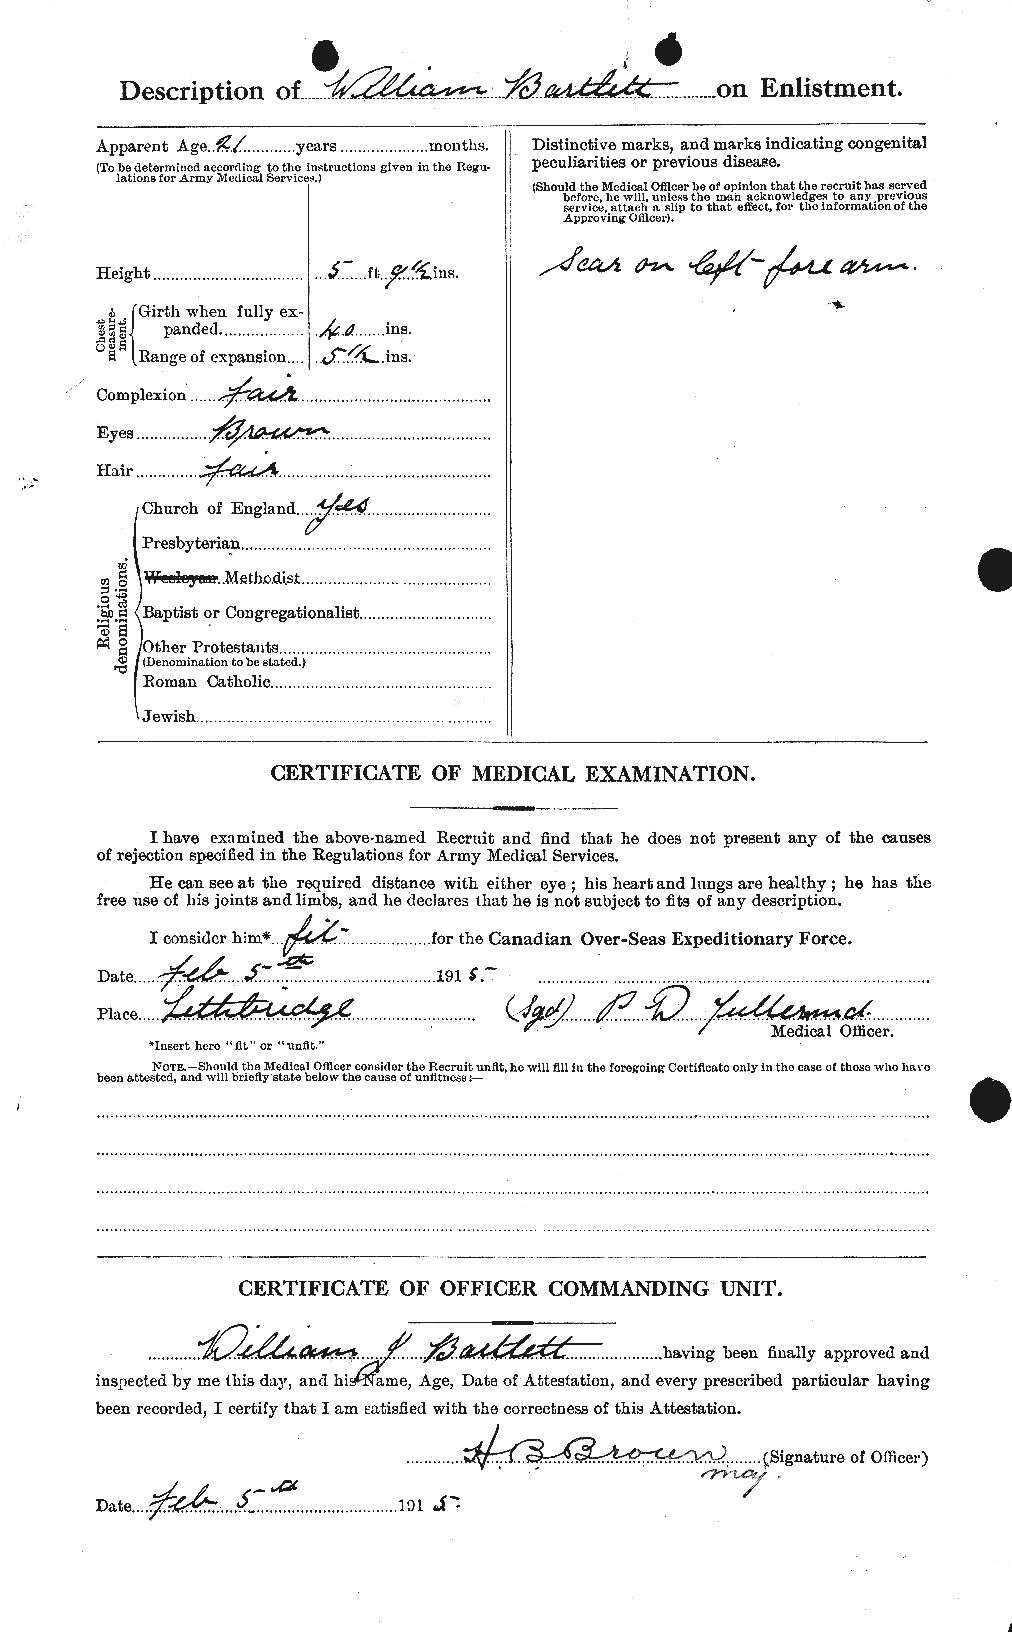 Personnel Records of the First World War - CEF 229357b